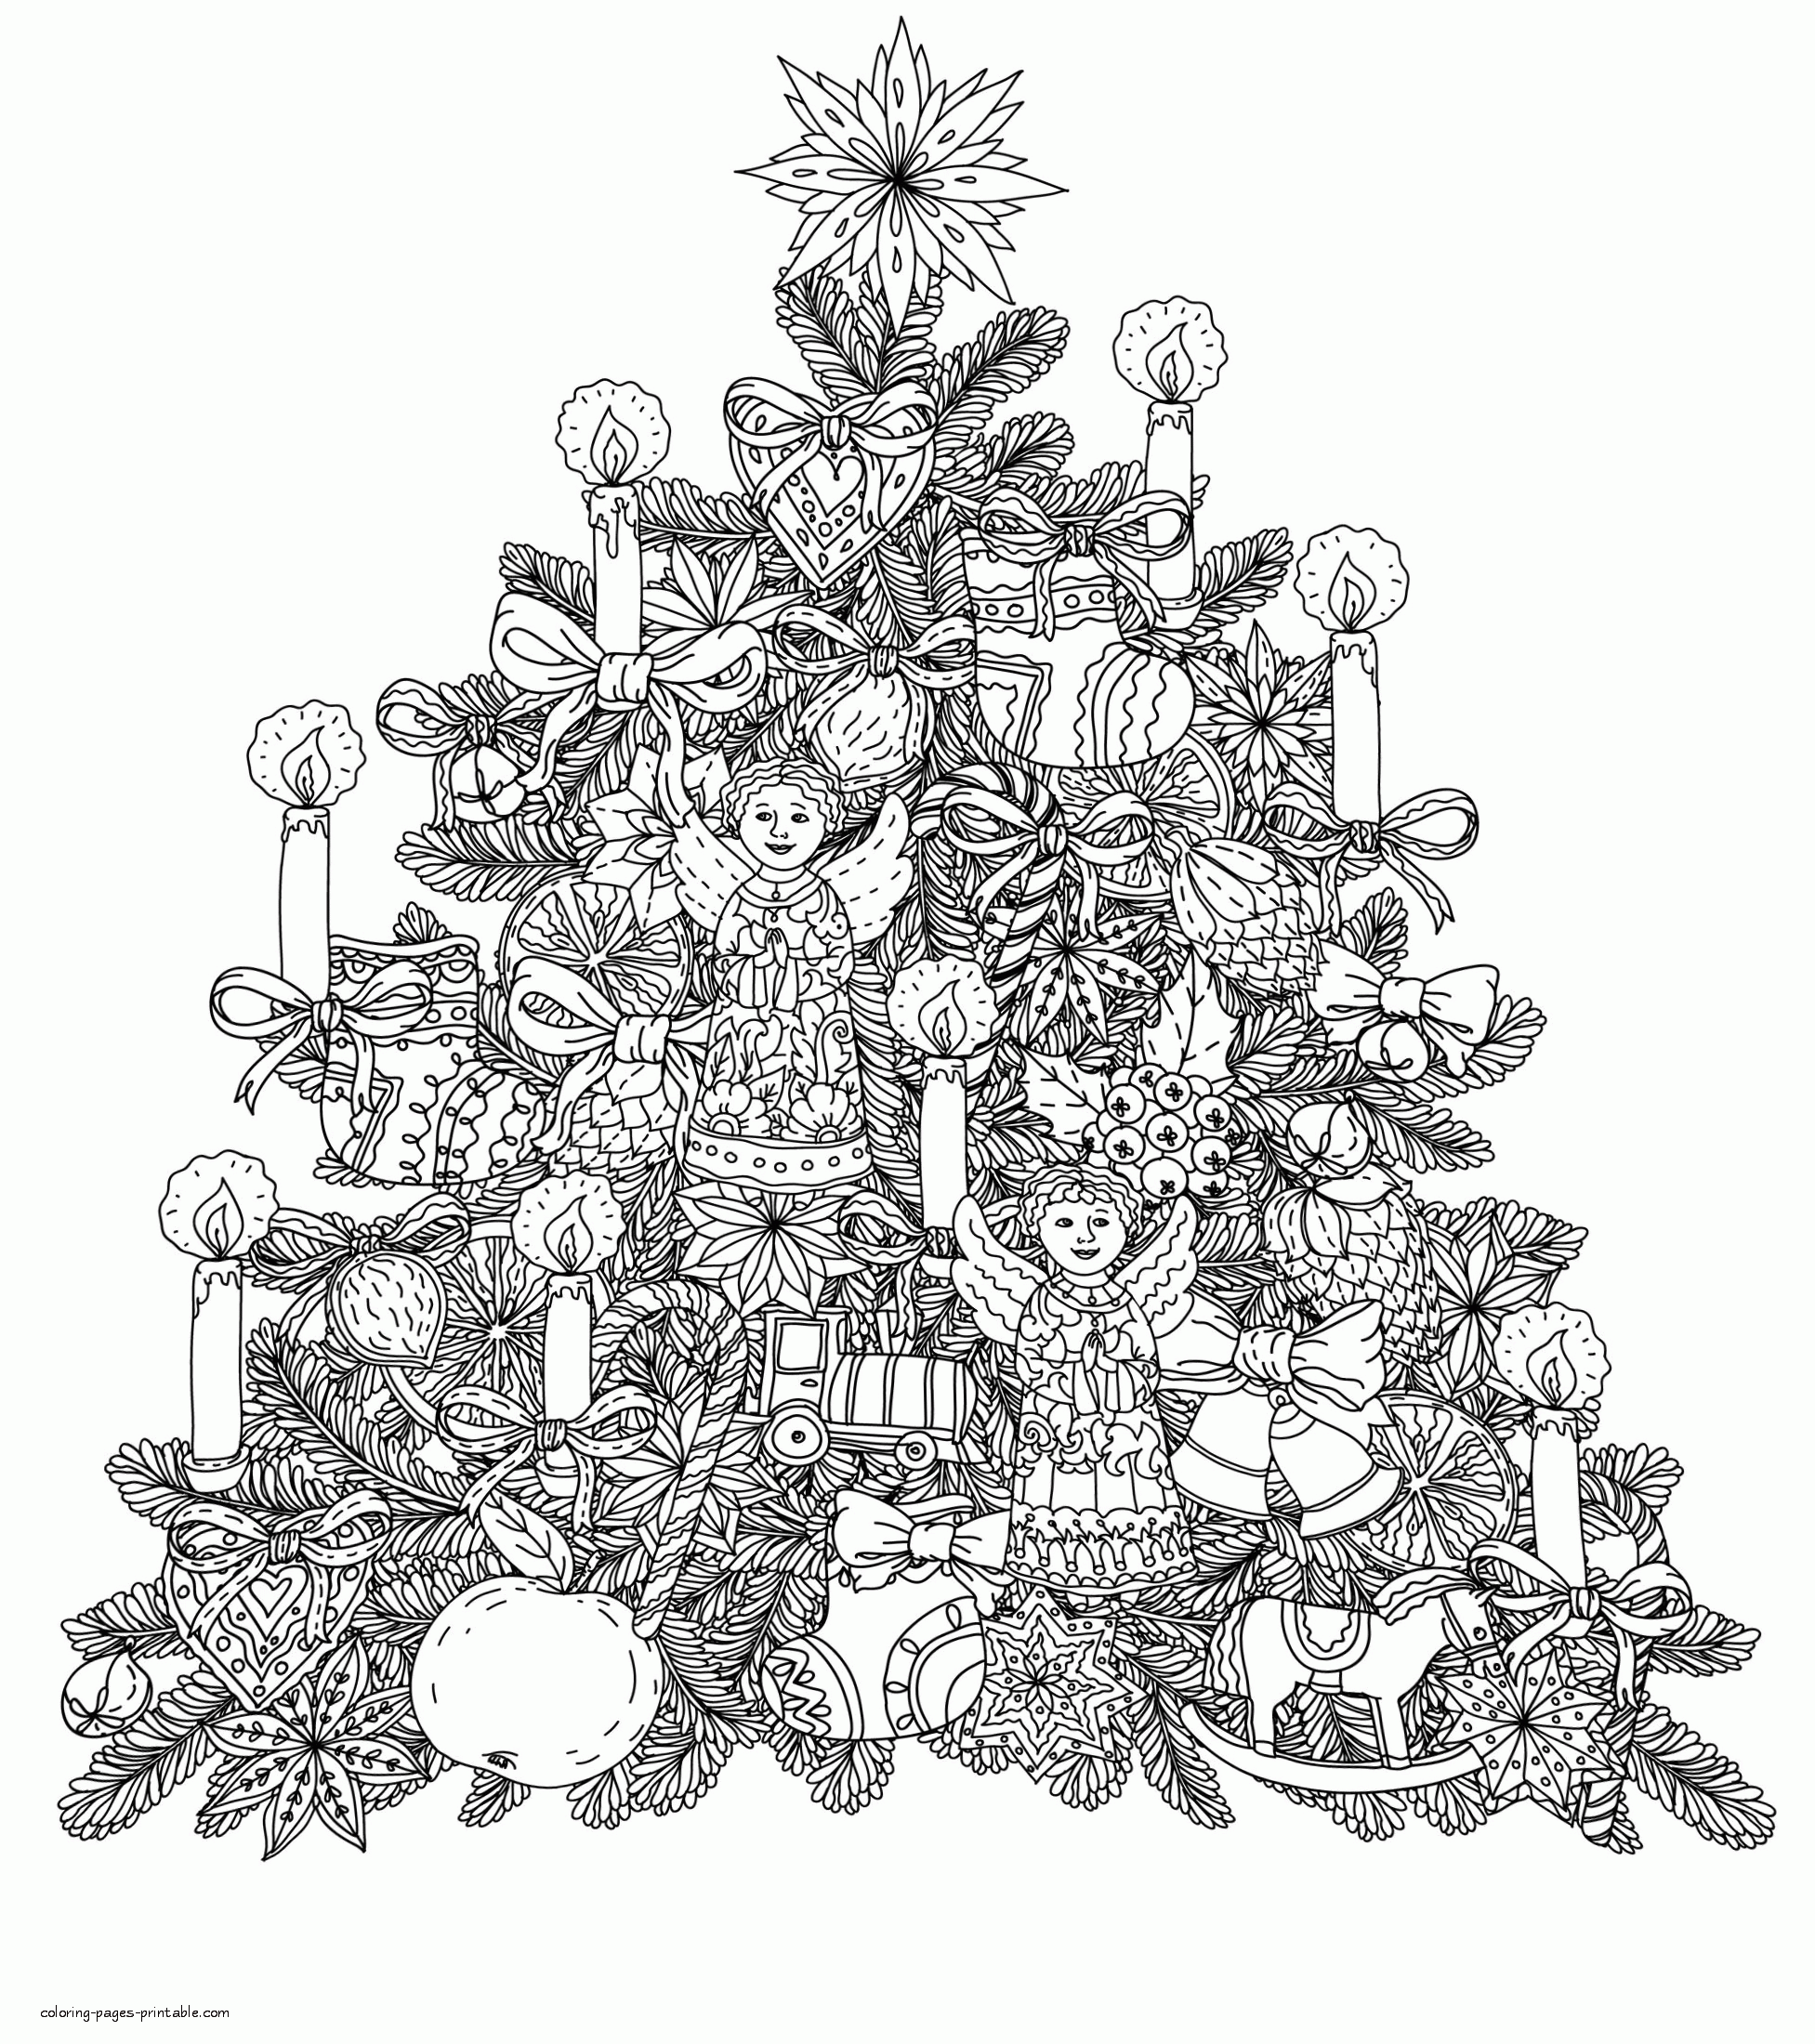 Printable Christmas Tree Coloring Pages For Adults || COLORING-PAGES